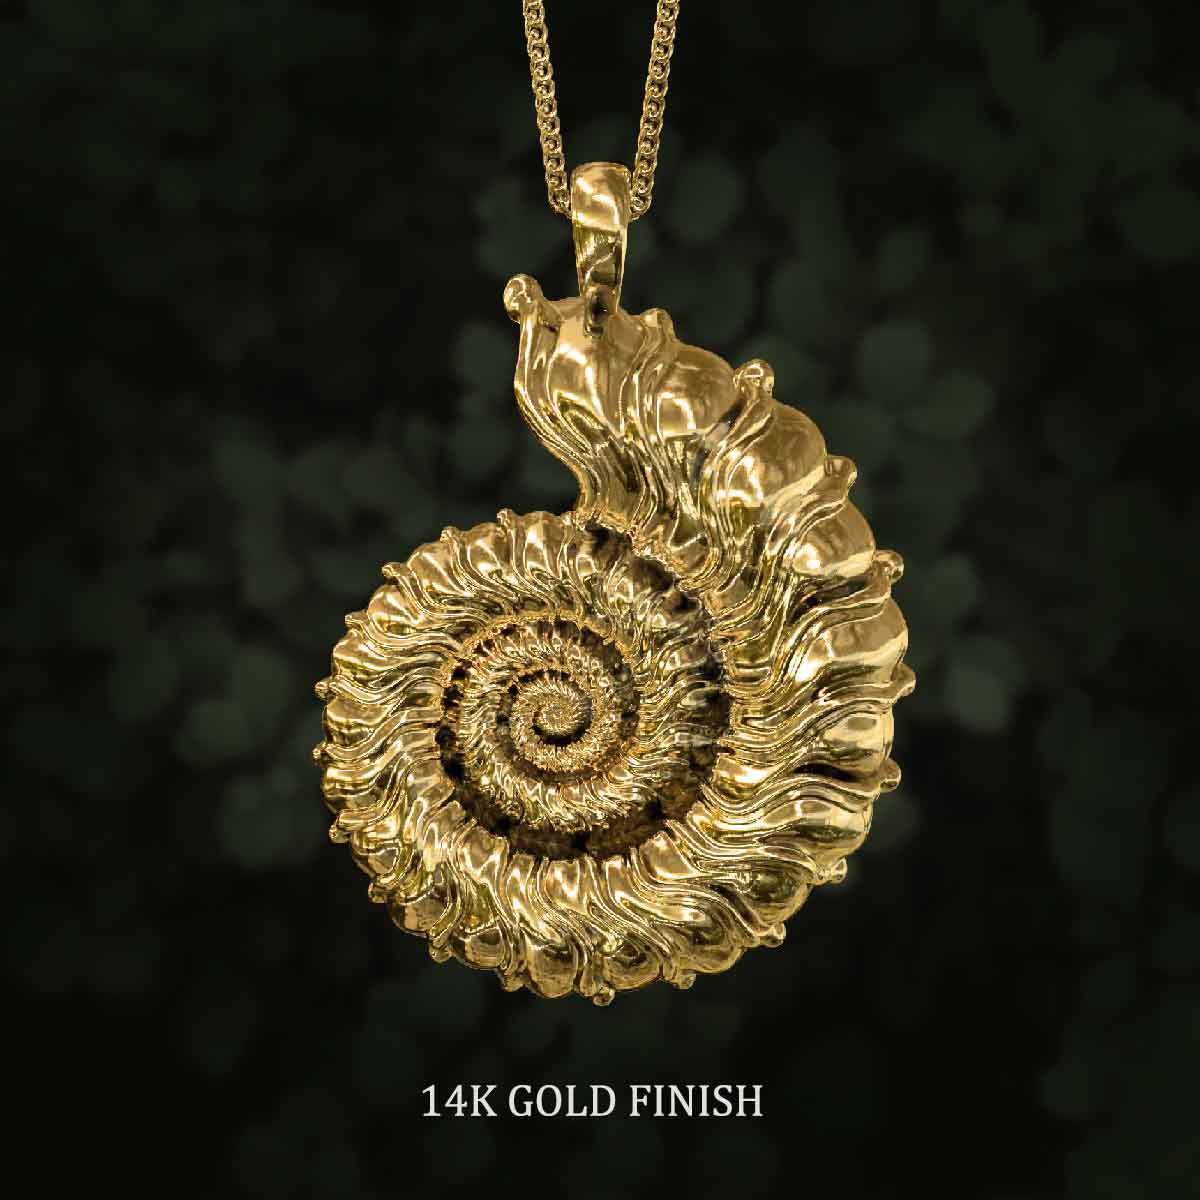 14k-Gold-Finish-Ammonite-Pendant-Jewelry-For-Necklace